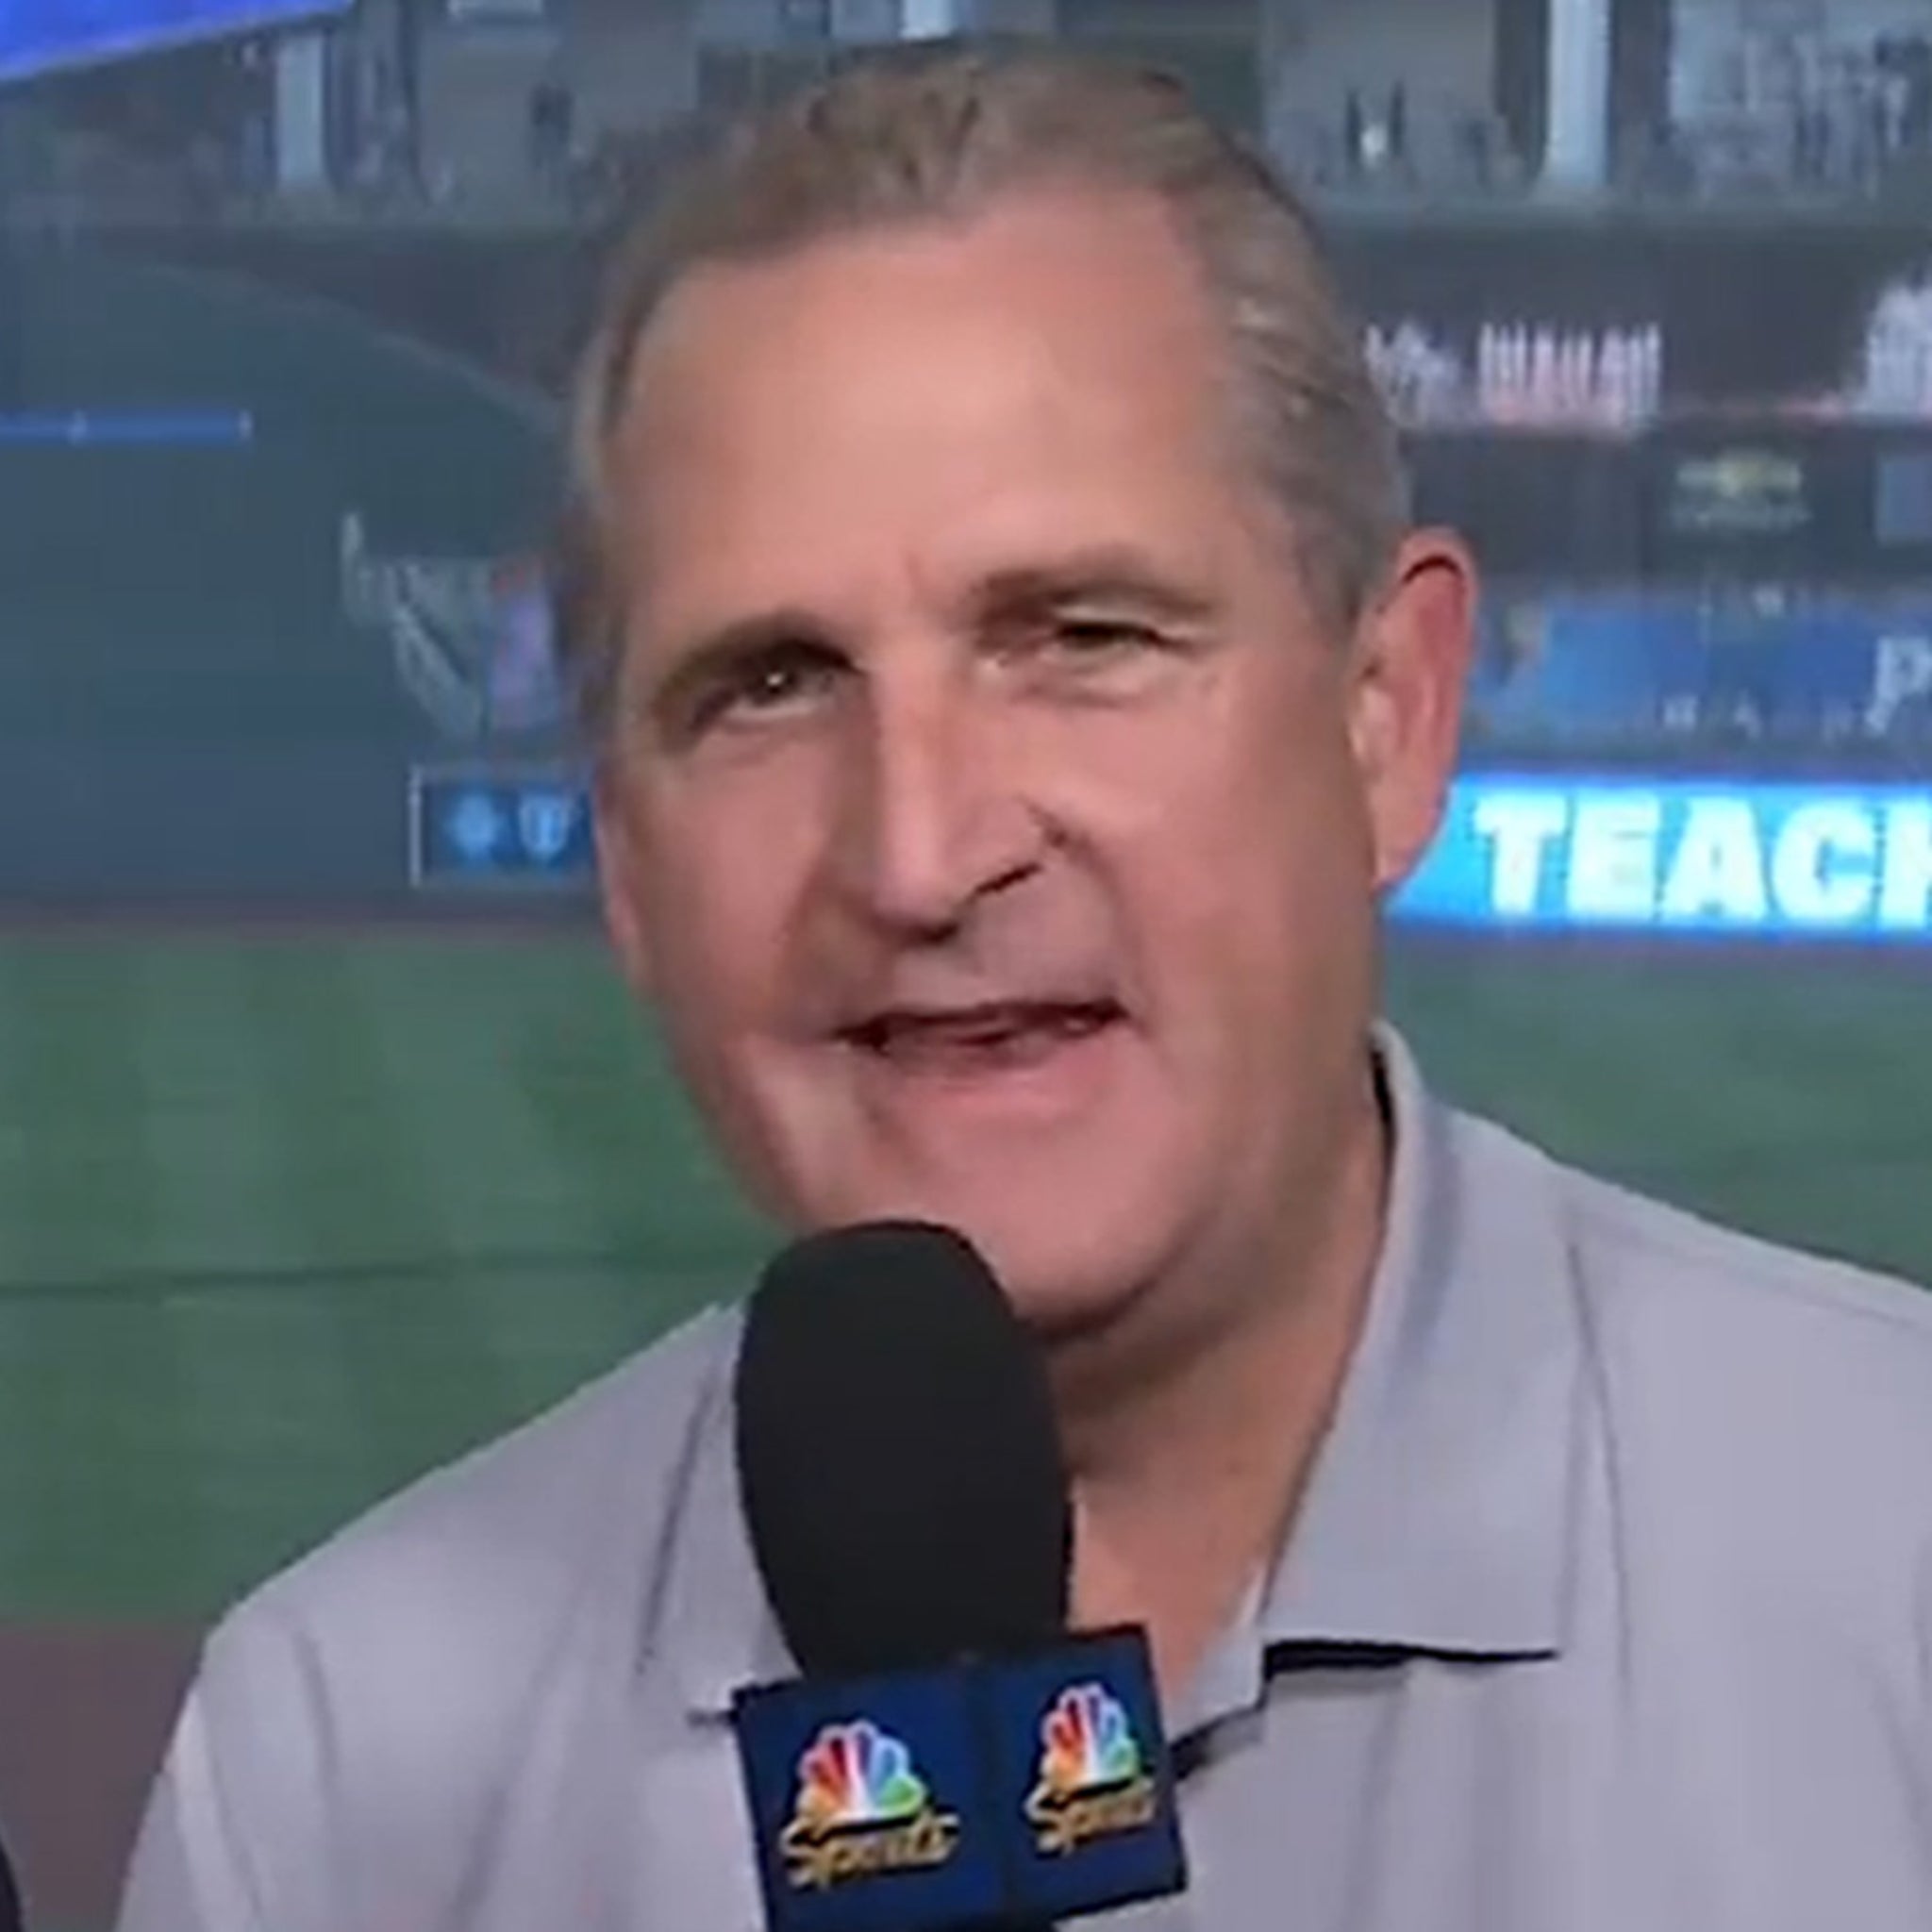 Oakland As Announcer Glen Kuiper Apologize, Gets Suspended for Dropping N-Word in Broadcast